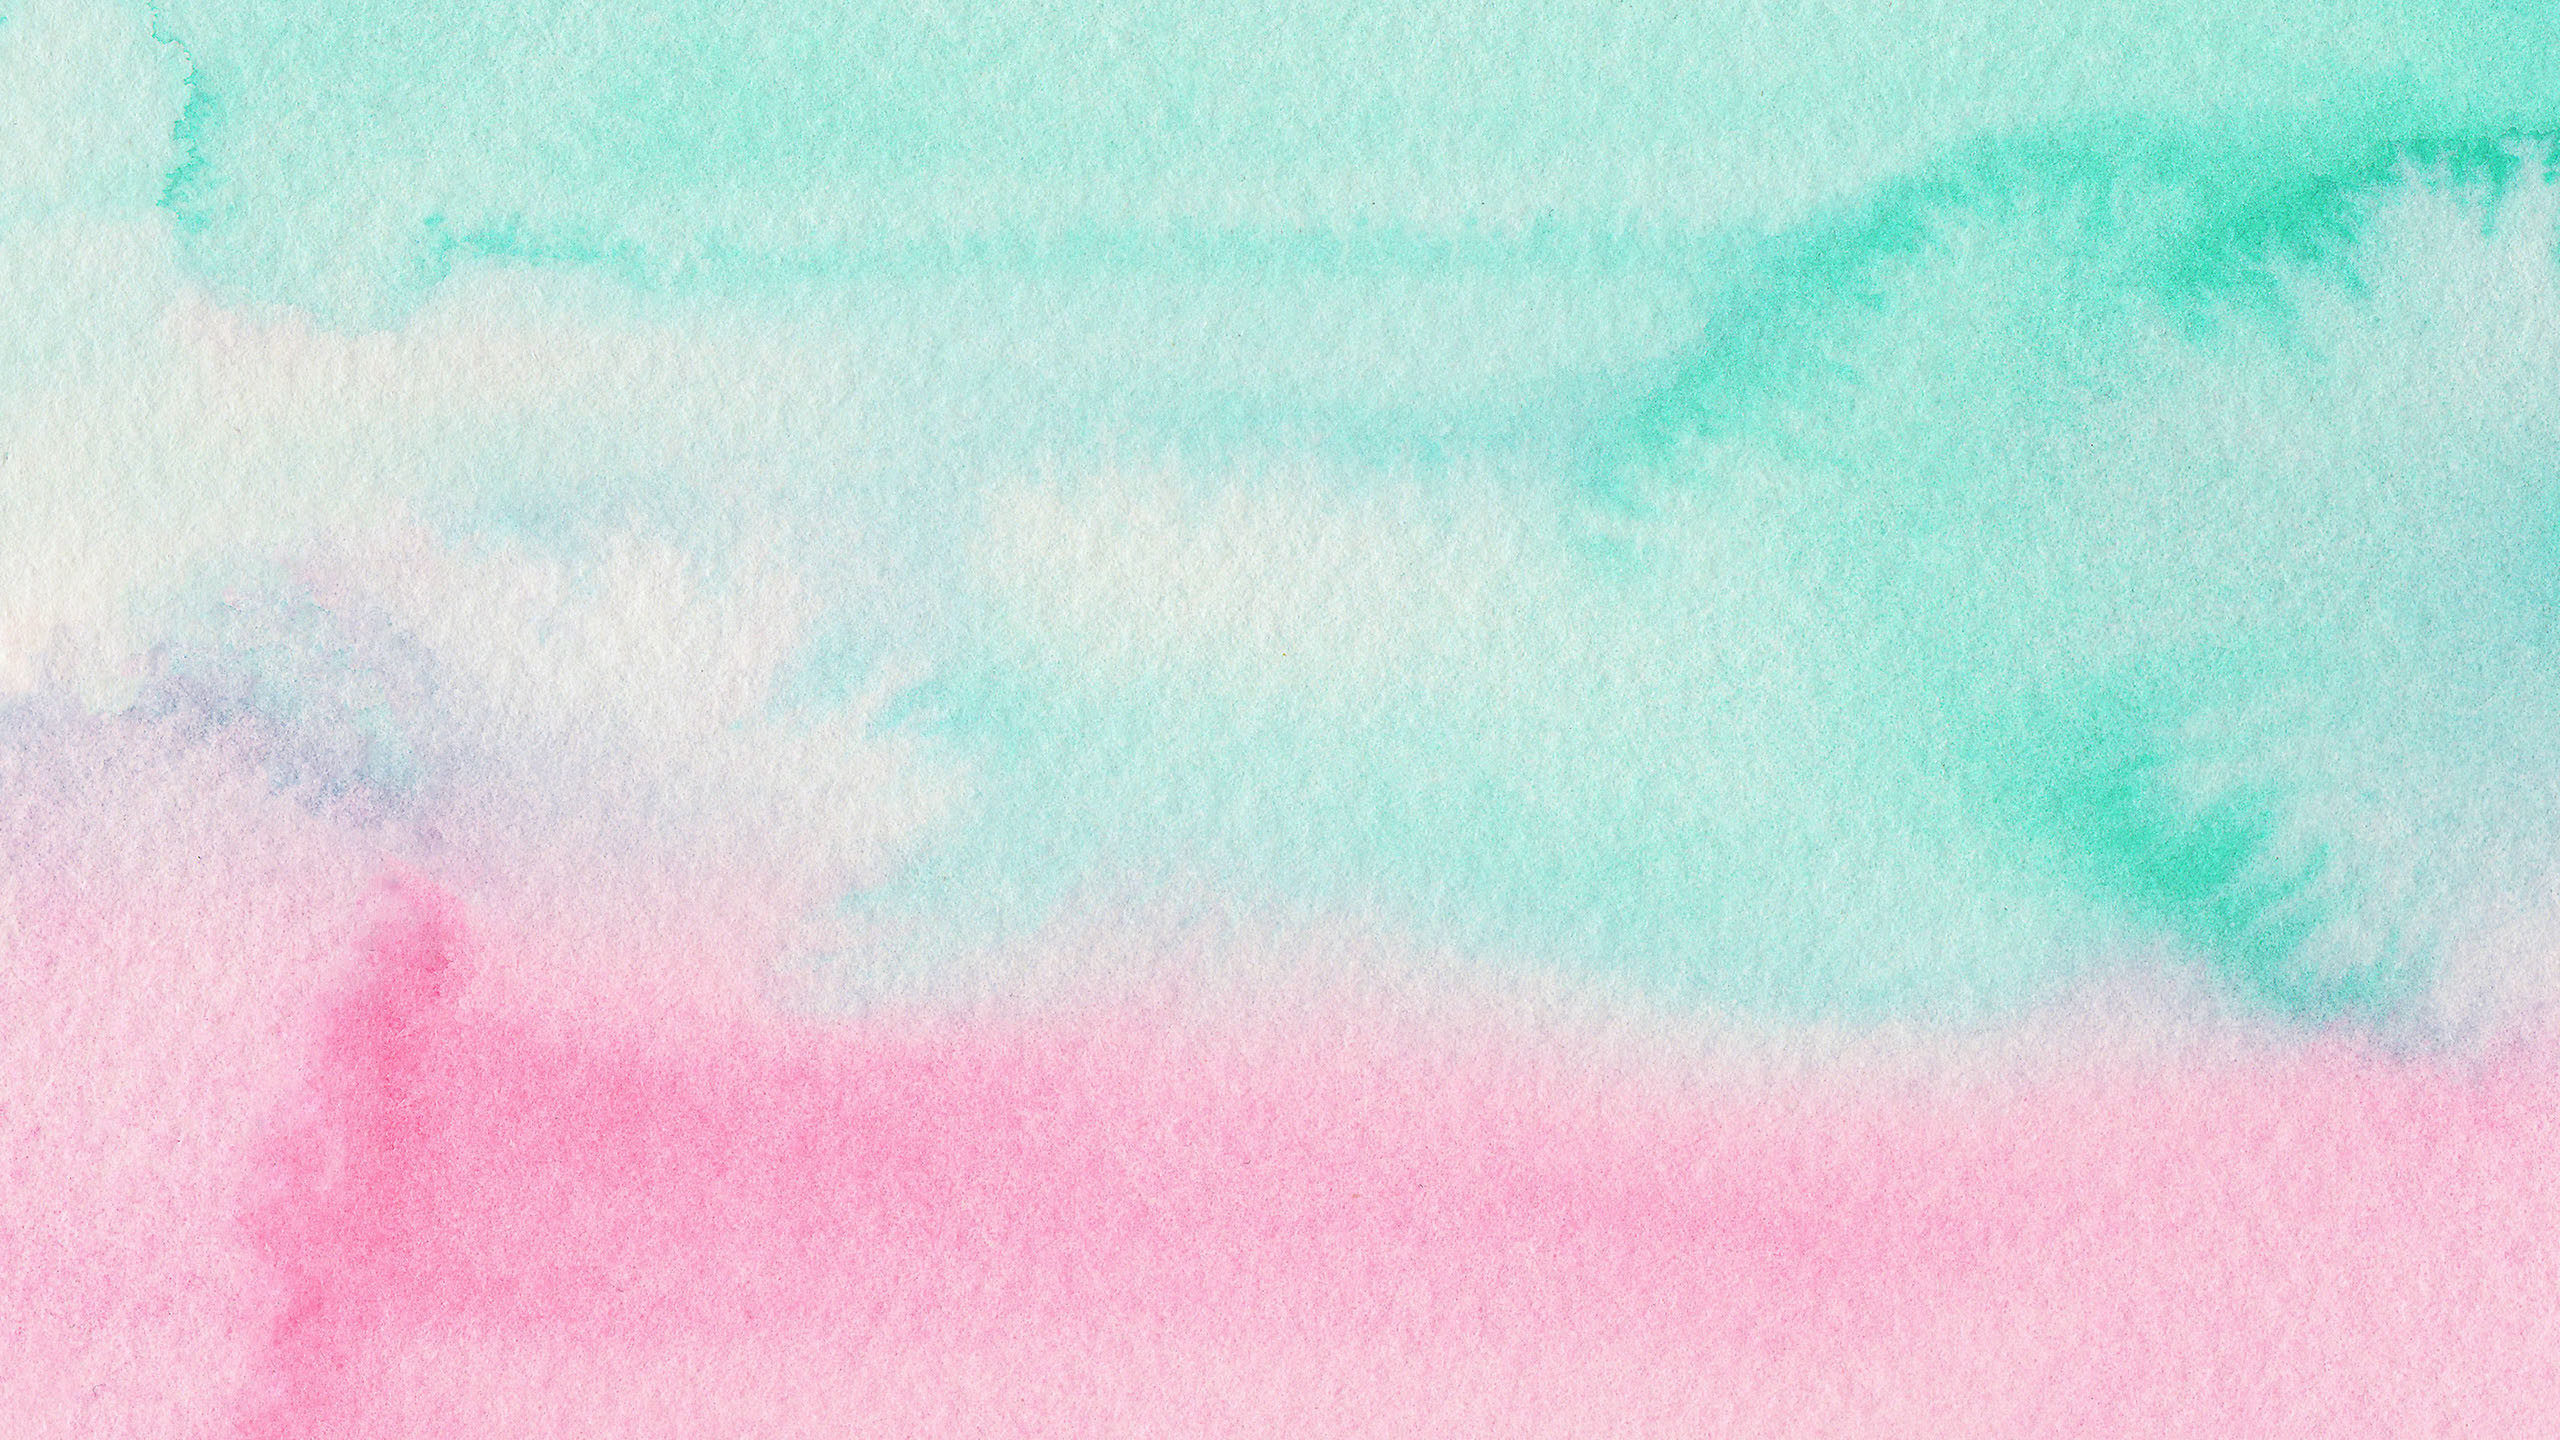 A watercolor painting of a pink and blue gradient - 2560x1440